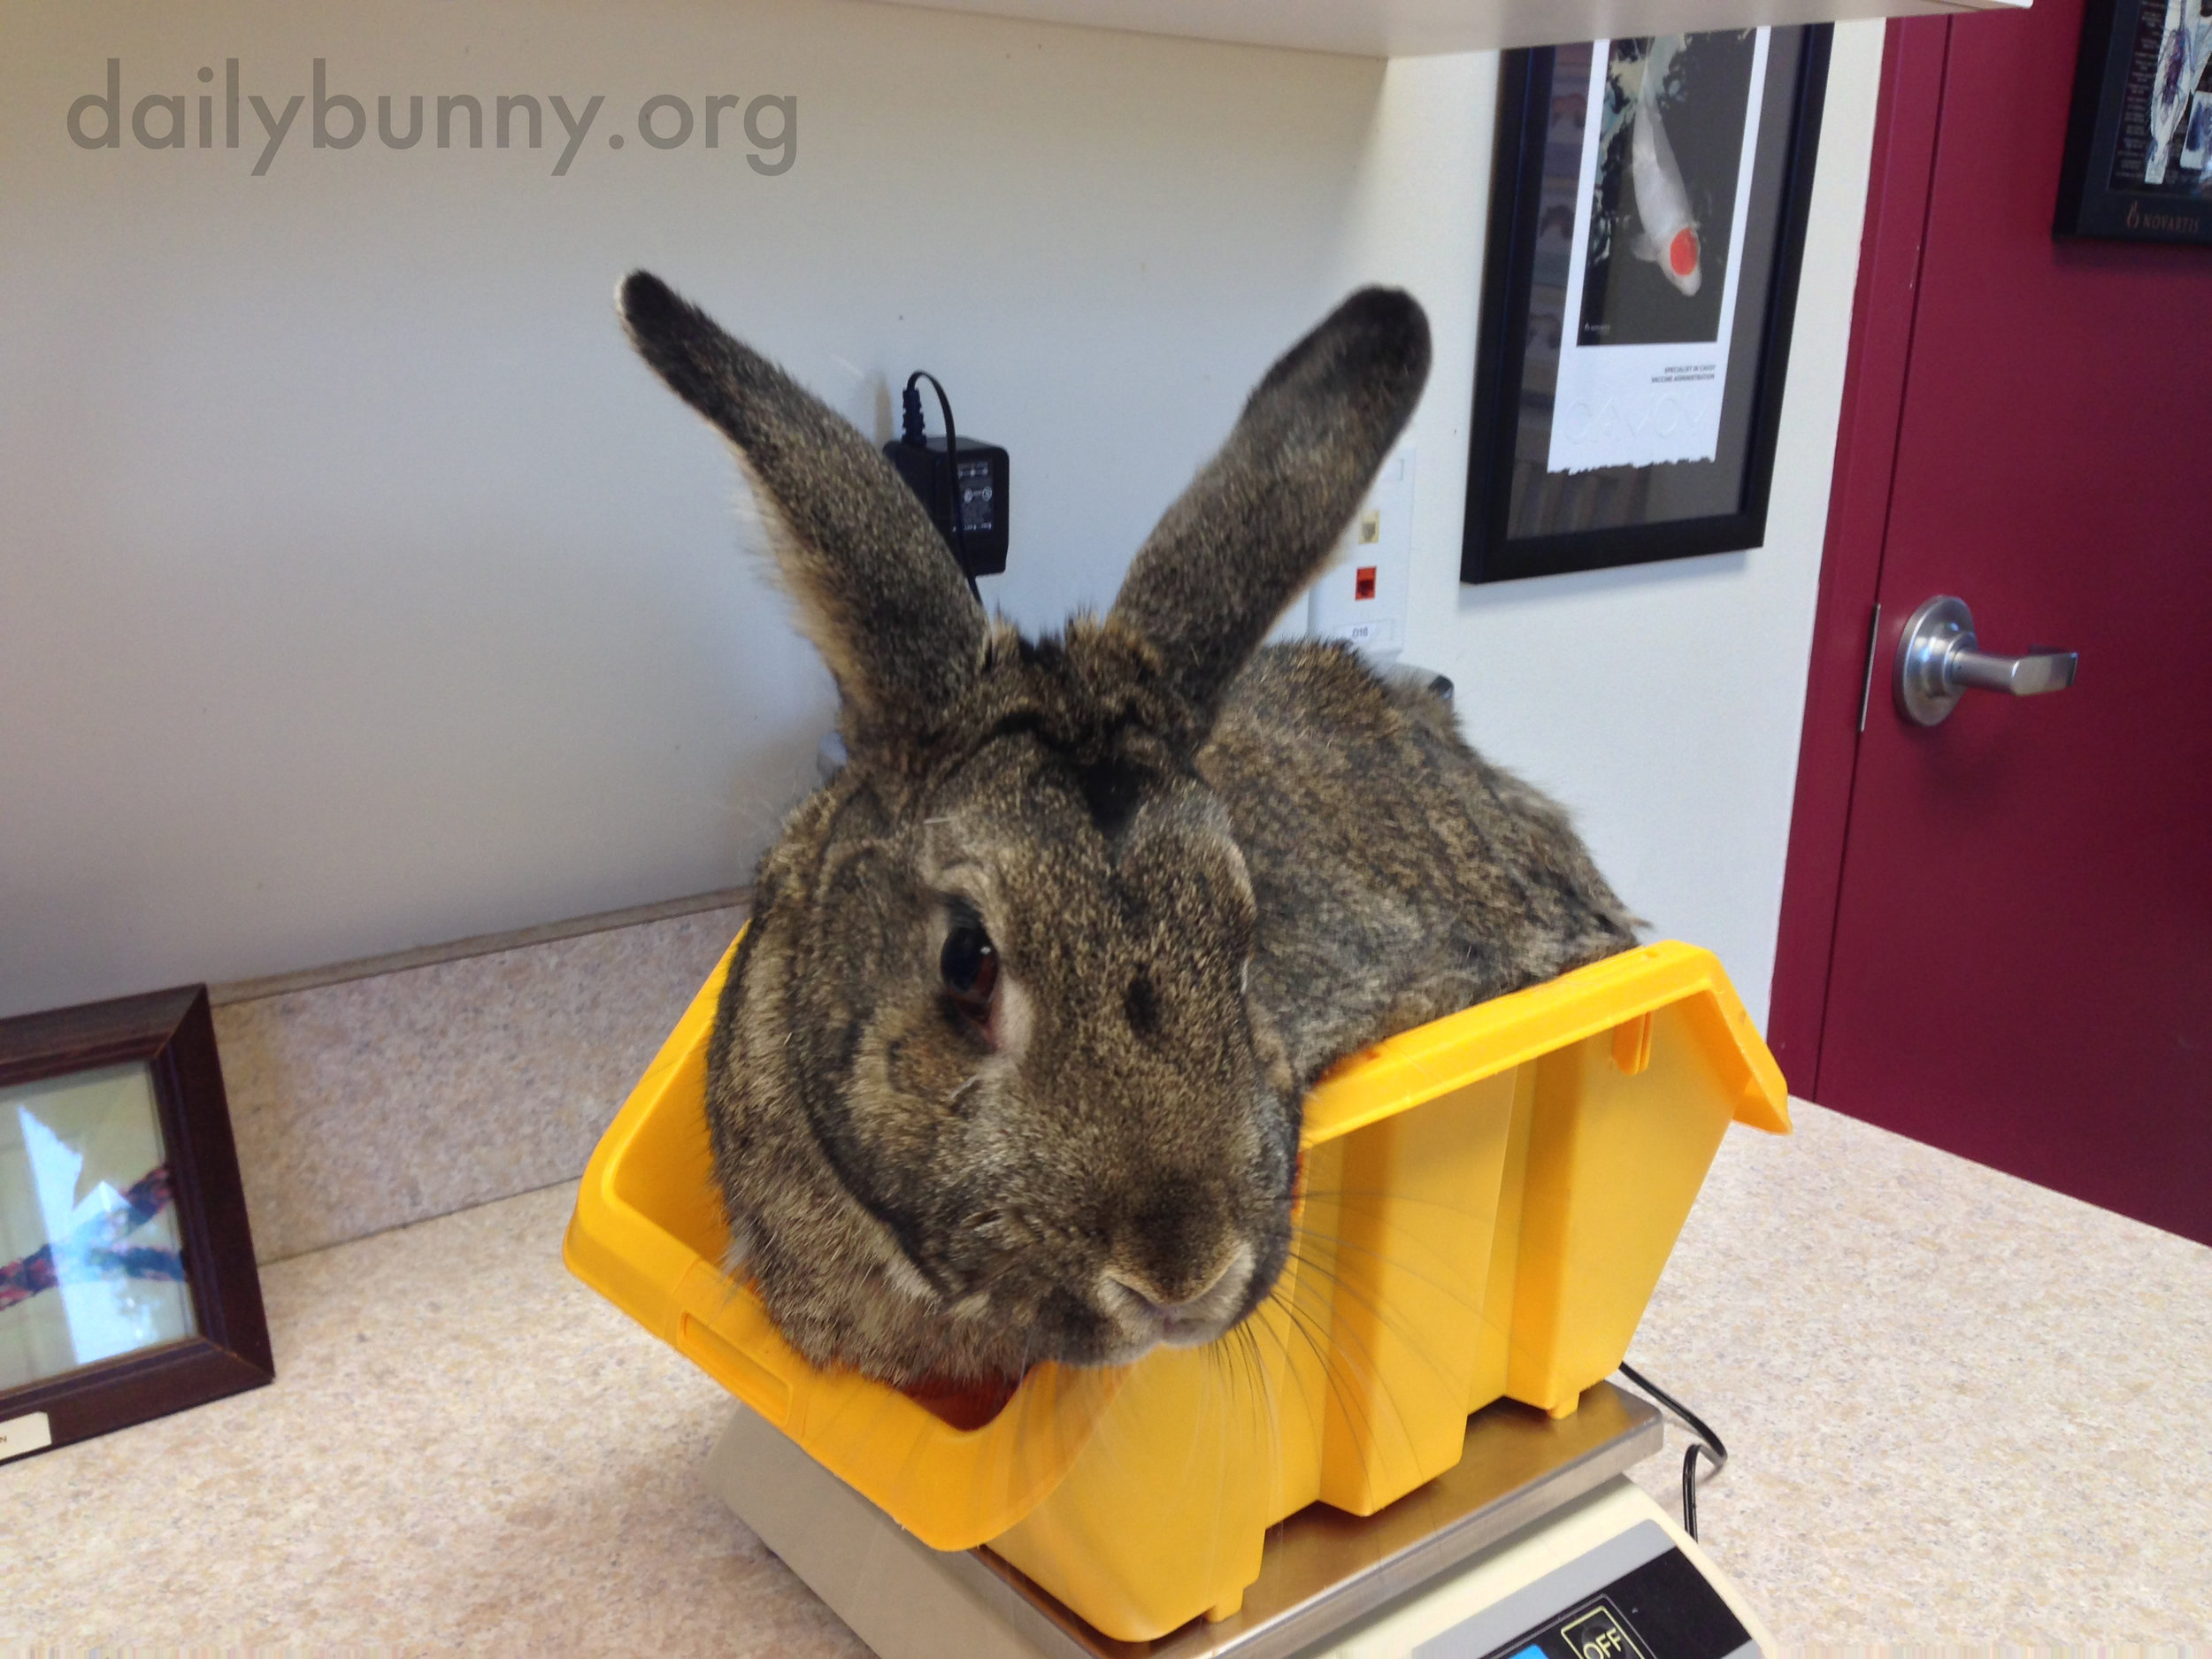 Bunny Looks a Little Shy About Being Weighed